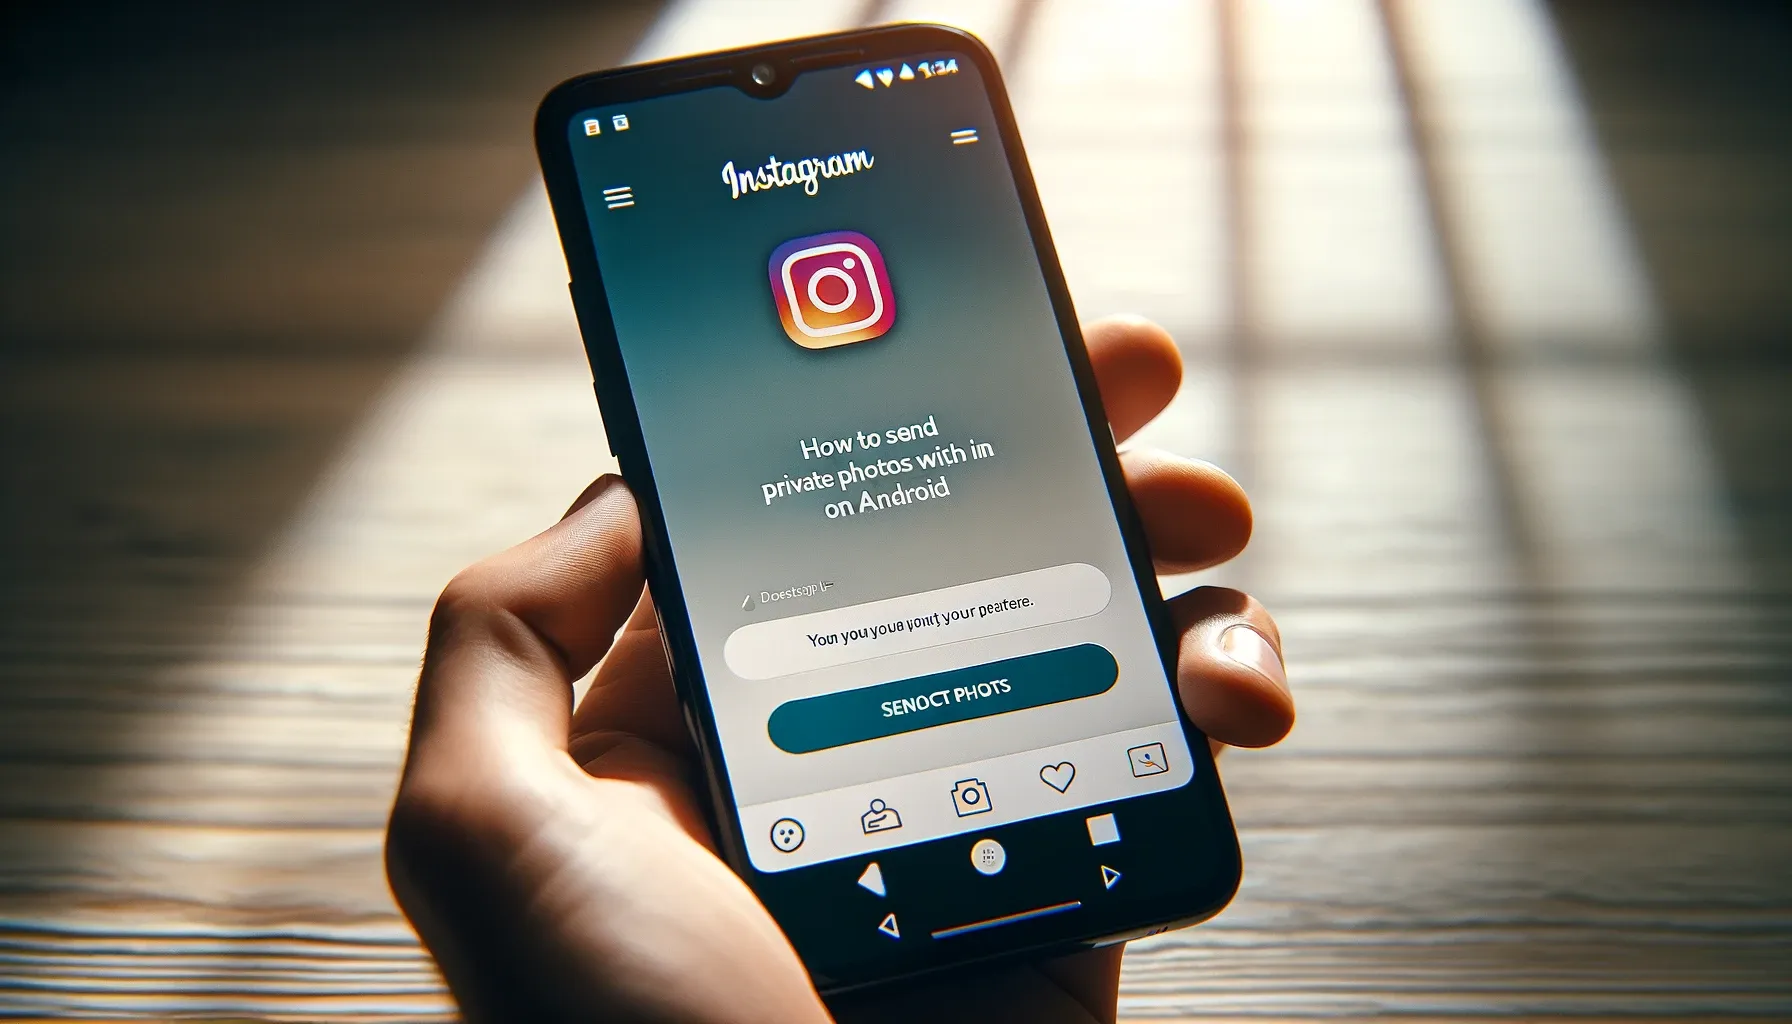 How to Send a Private Photos with Instagram on Android?